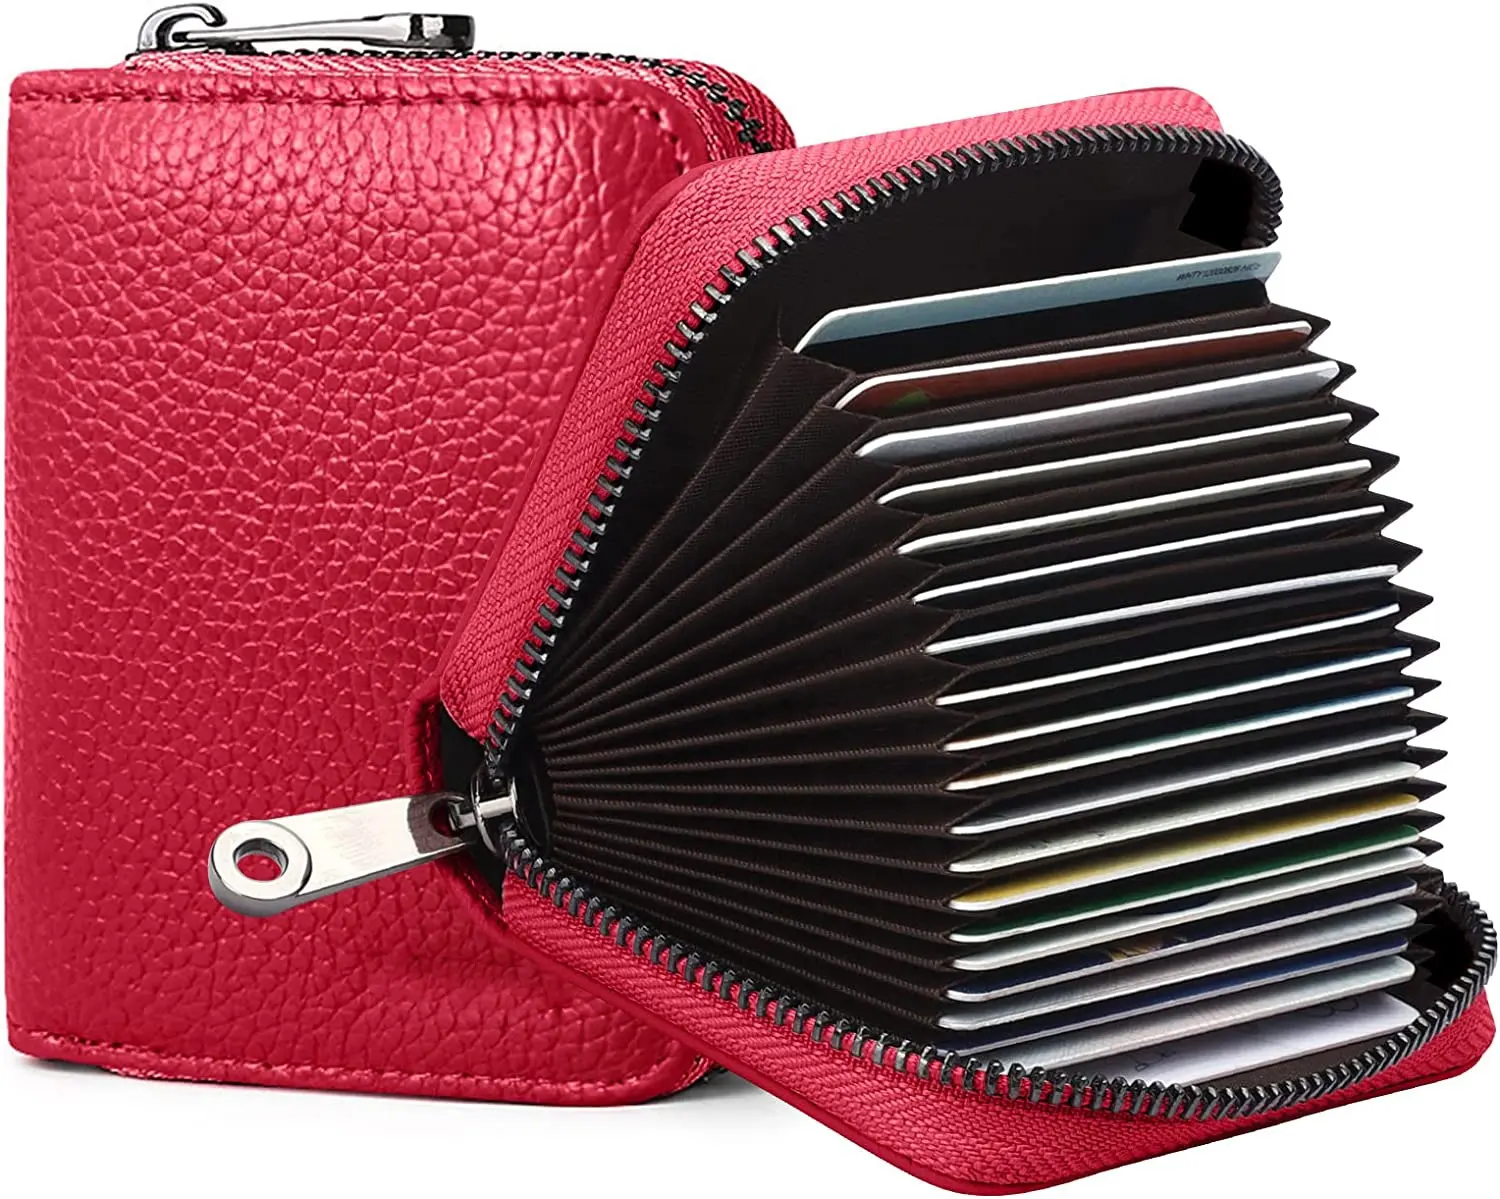 RFID 20 Card Slots Credit Card Holder Genuine Leather Small Card Case for Women or Men Accordion Wallet with Zipper Red